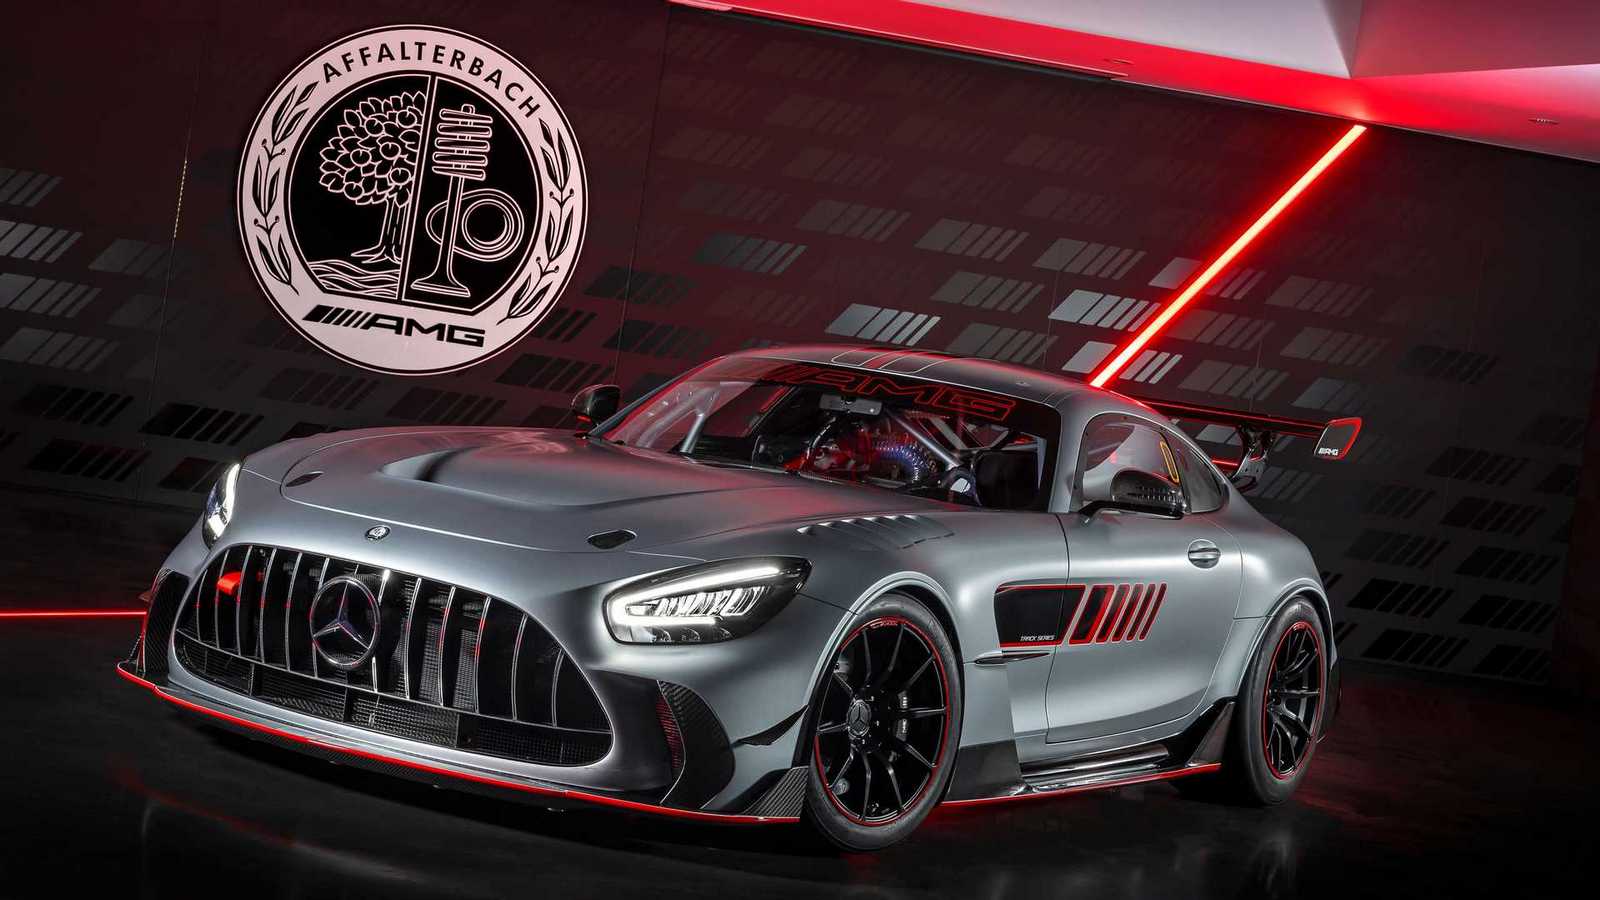 Mercedes-AMG adds a new model for its 50th anniversary